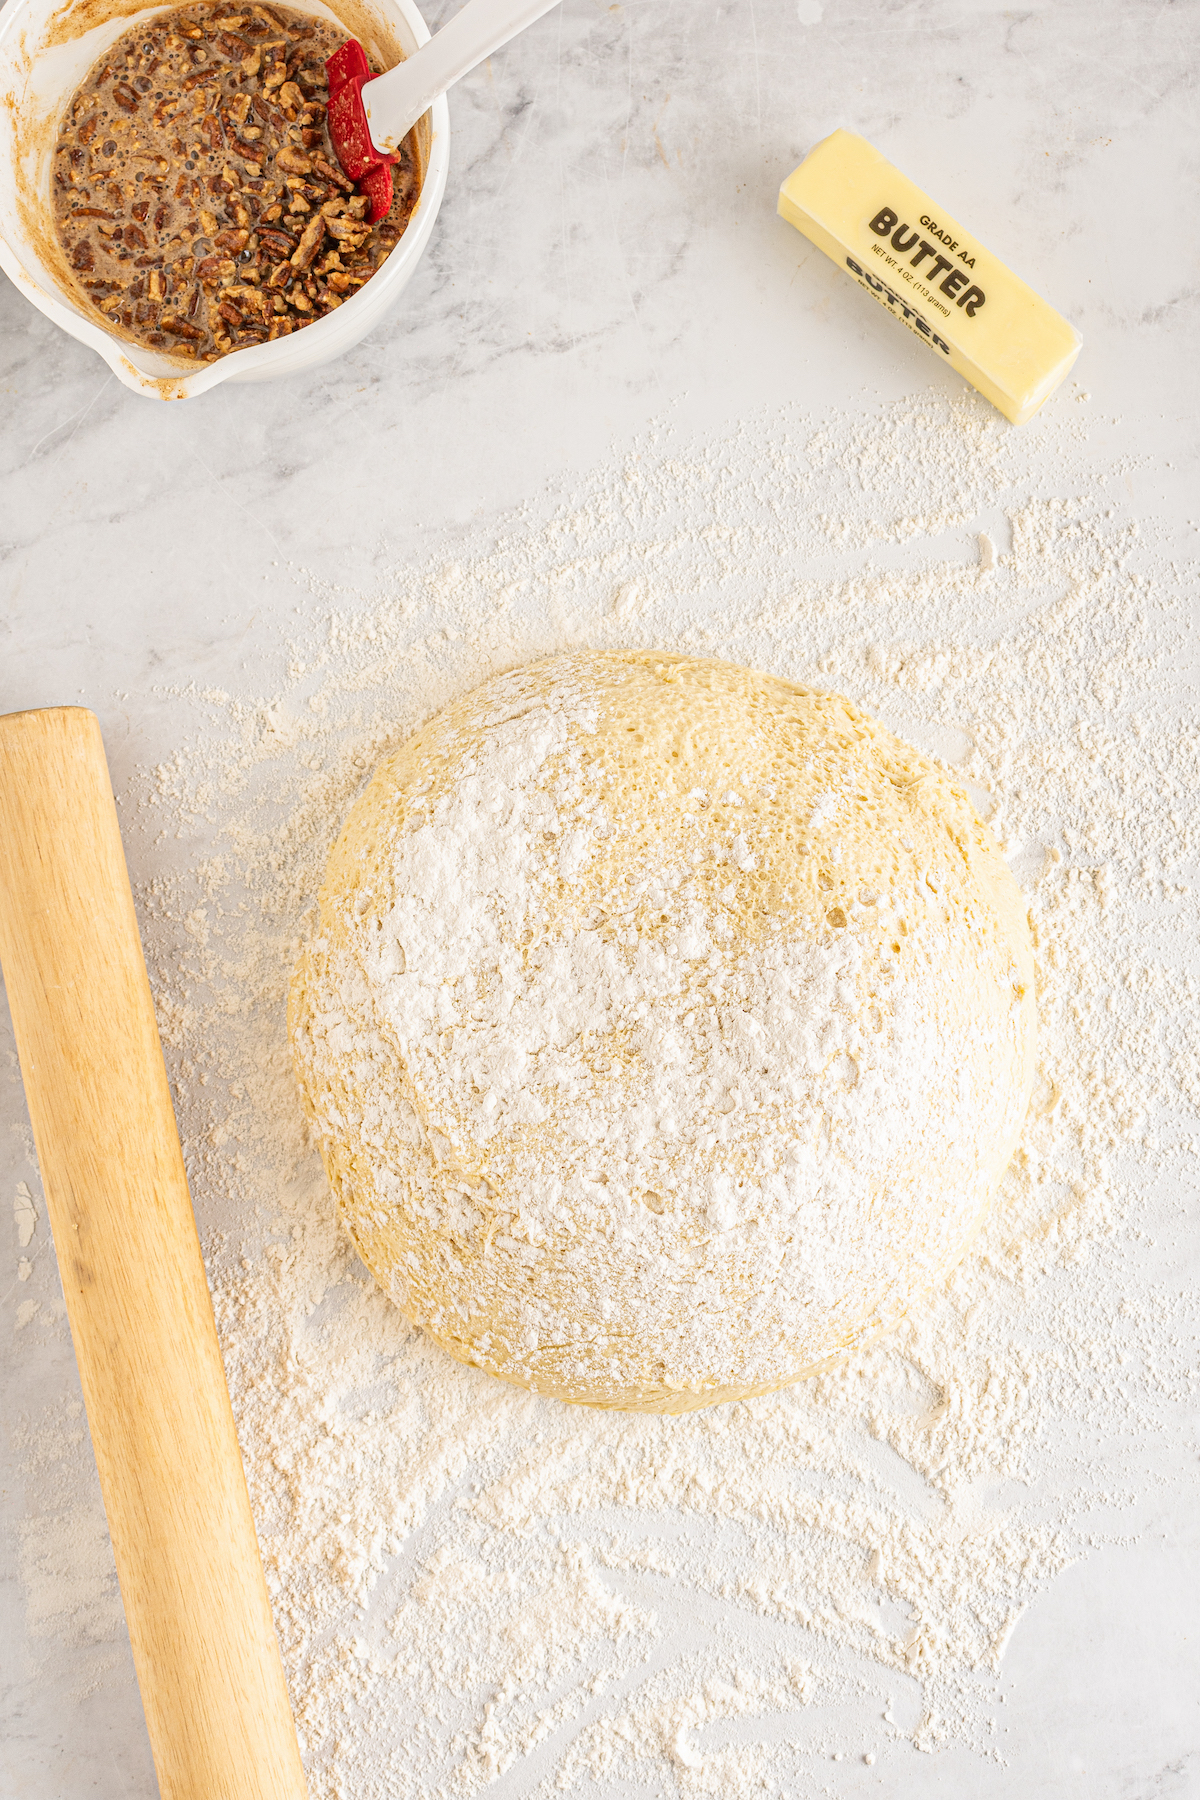 Dough turned out onto a floured surface next to a rolling pin, a container of filling, and a stick of softened butter.